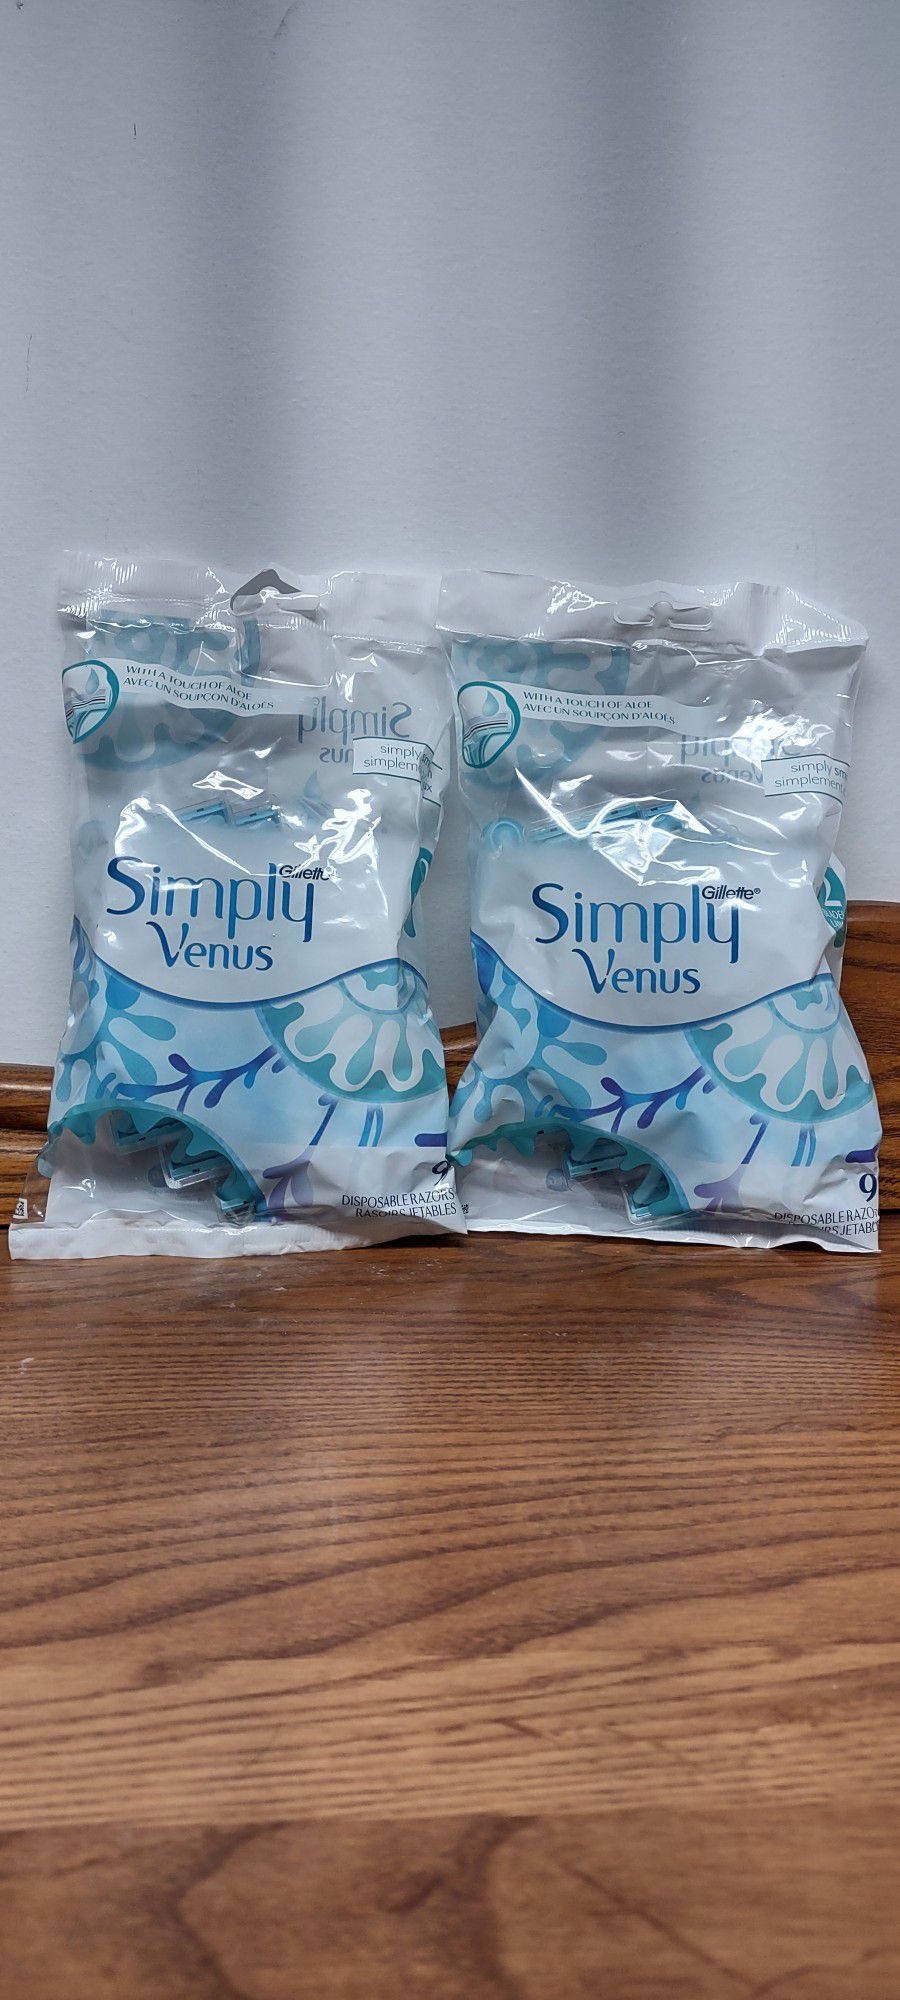 2 Simply Venus Disposable Razors 9 CT (New) $7 Only 